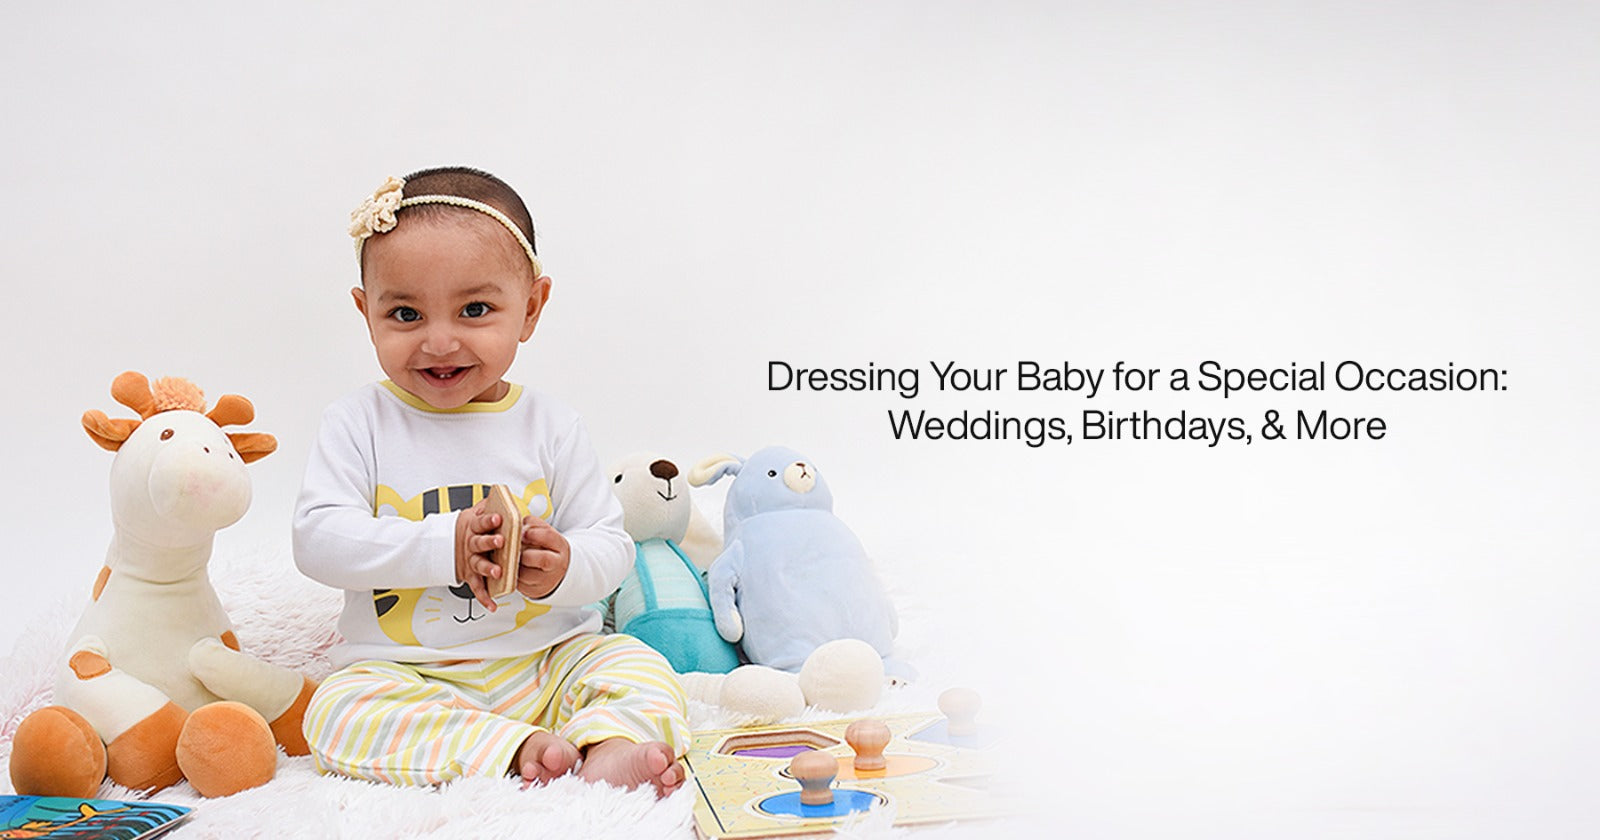 Dressing Your Baby for a Special Occasion